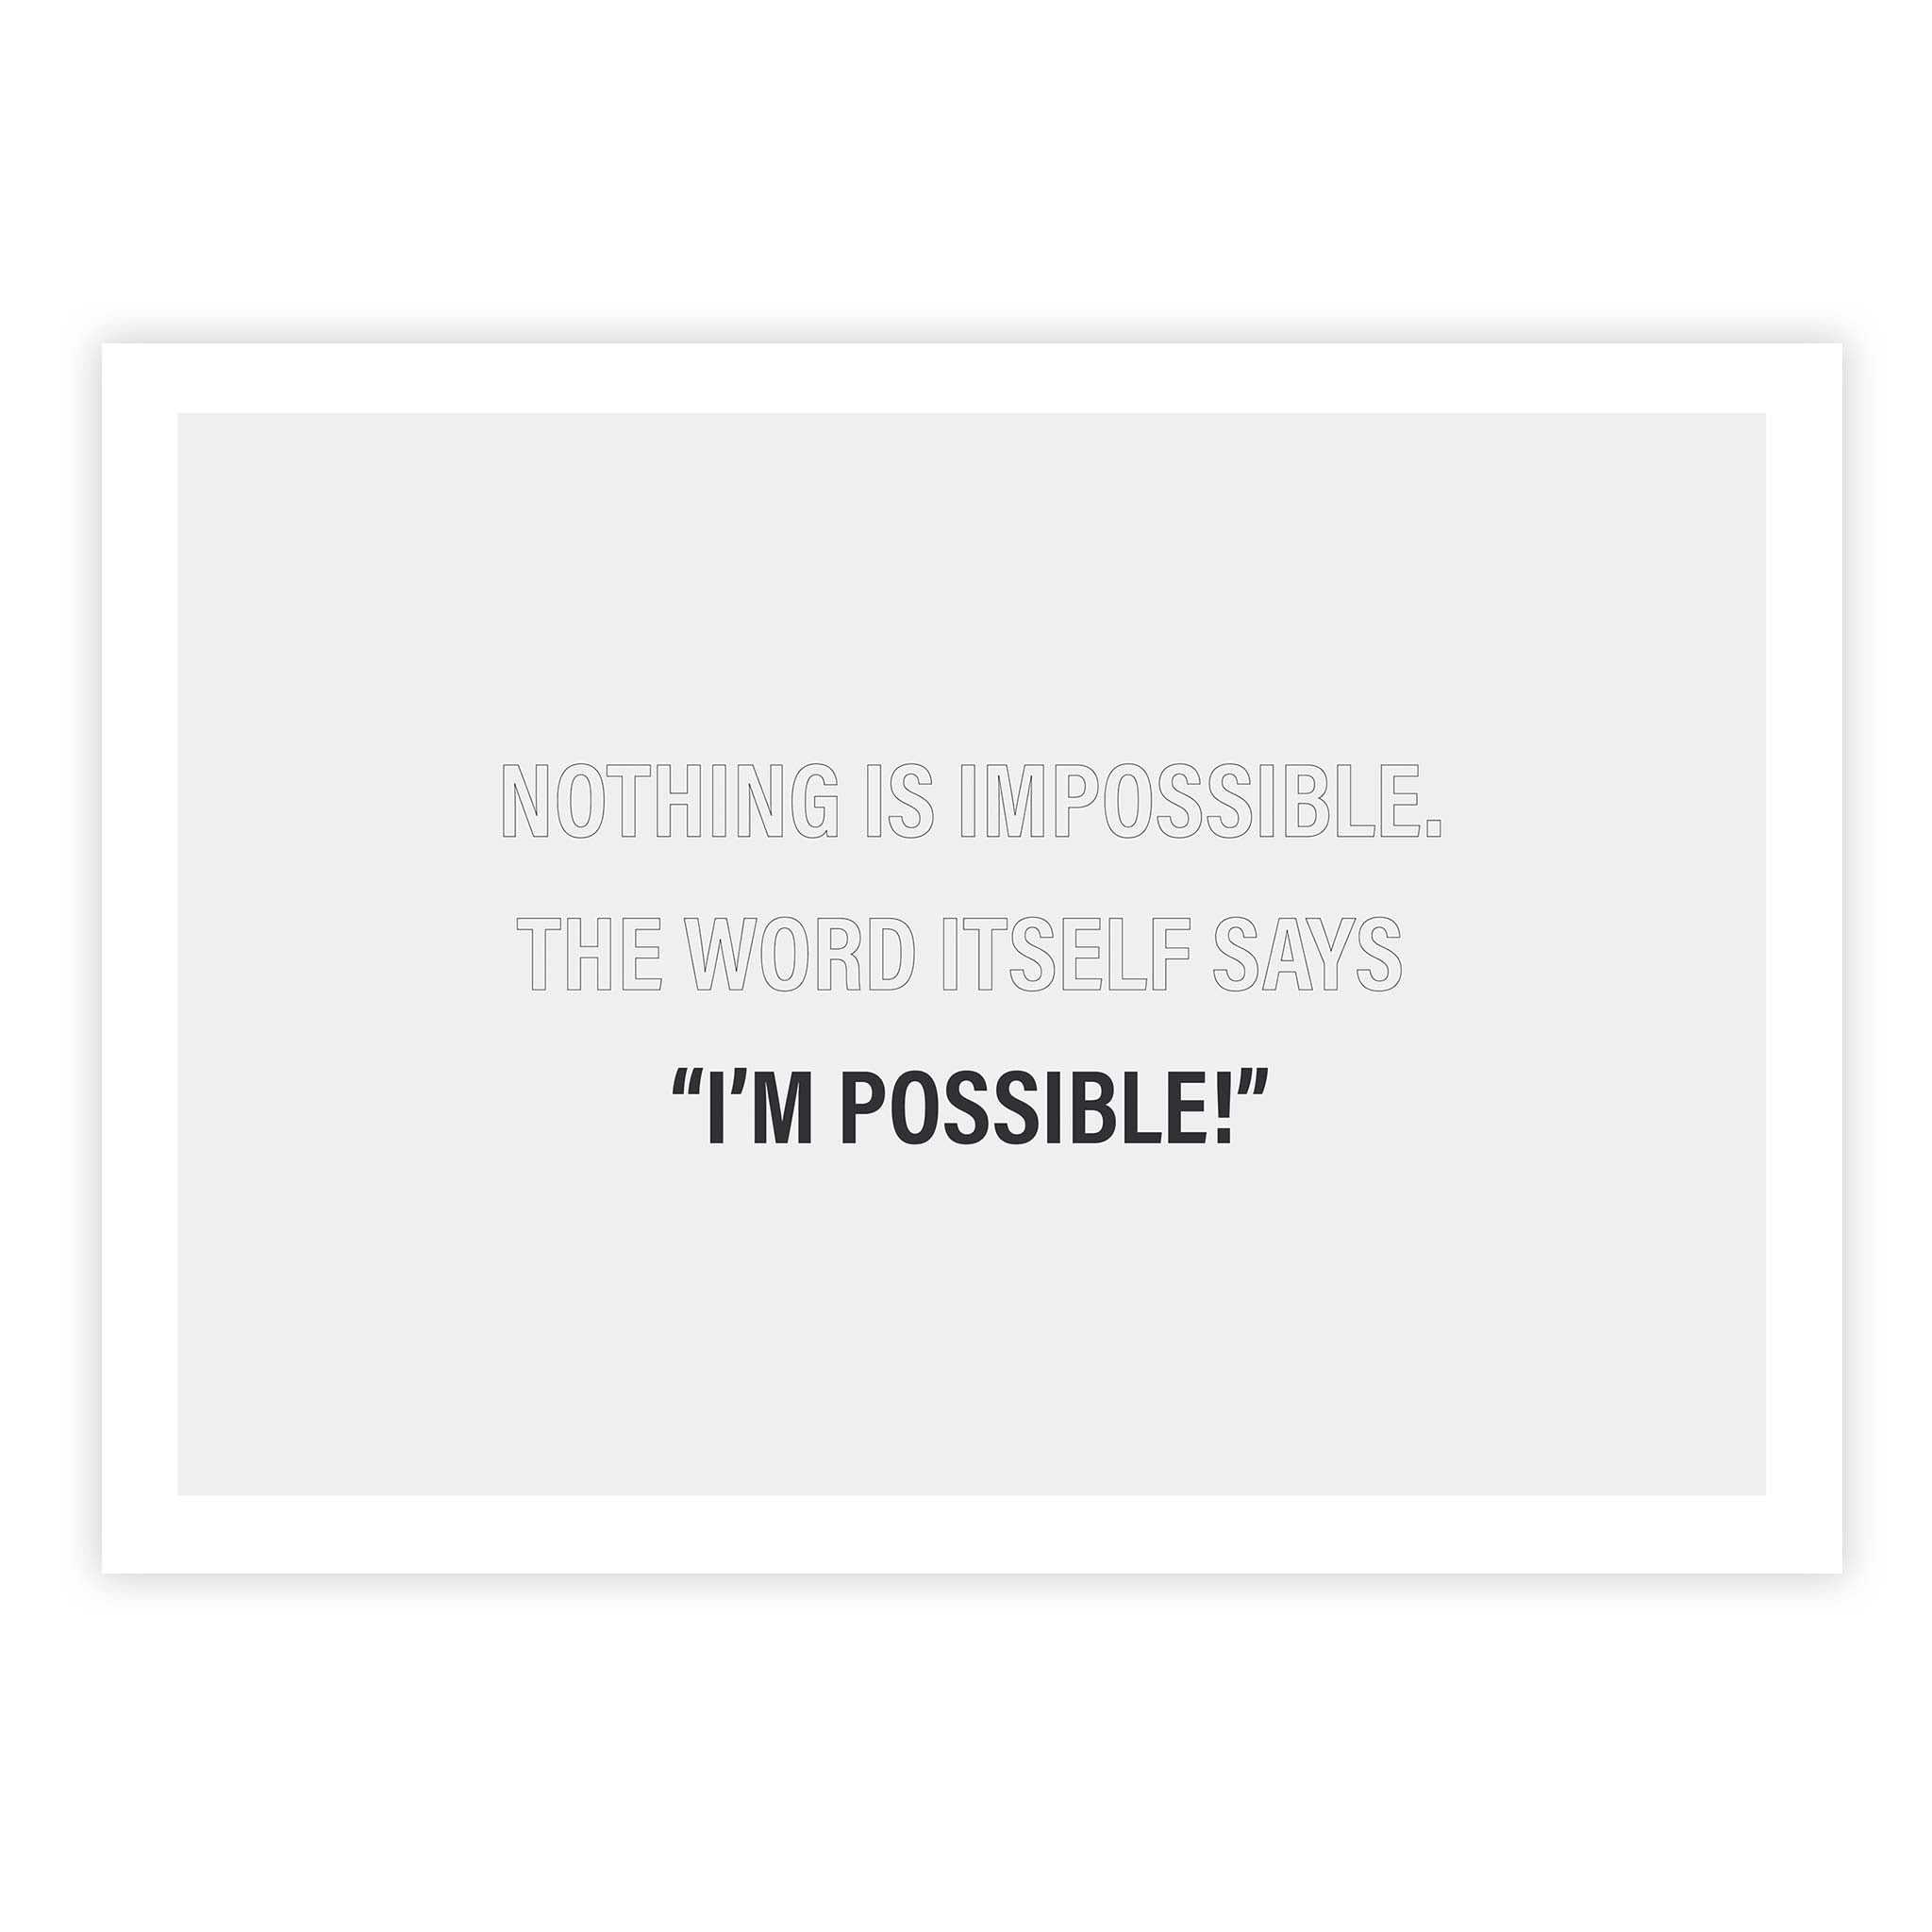 Nothing is impossible. The word itself says ‘I’m possible!'